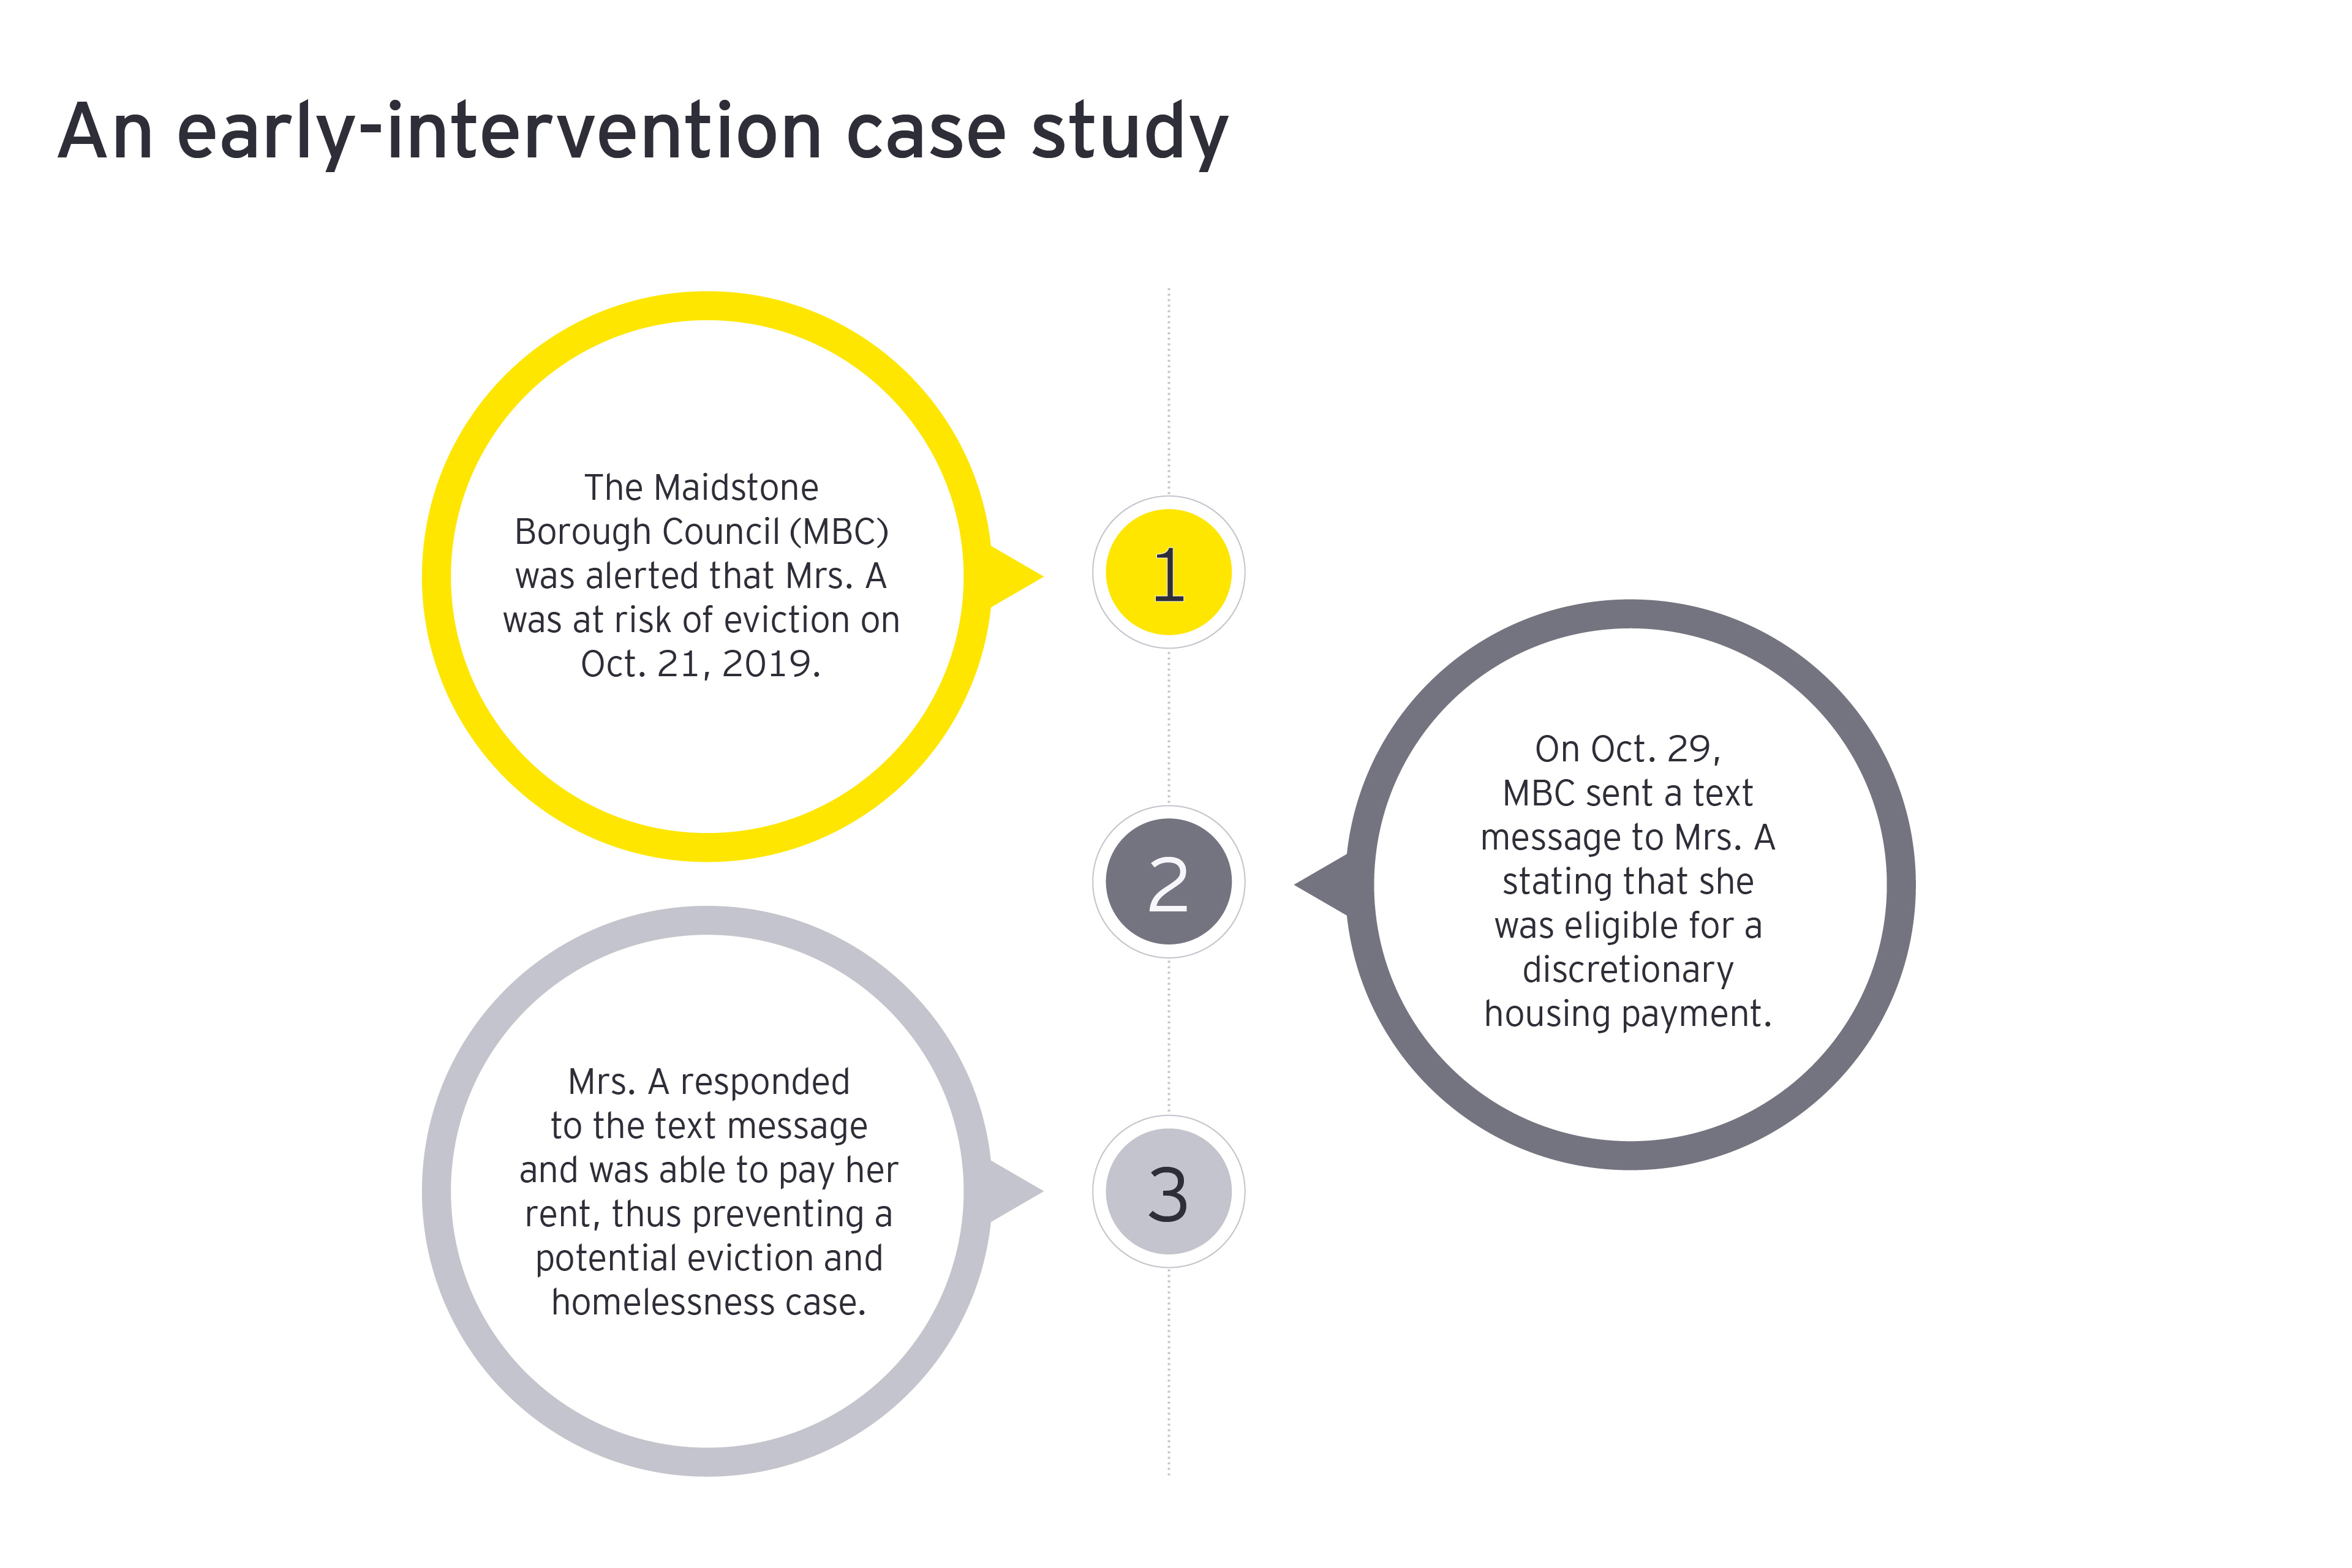 An early intervention case study infographic